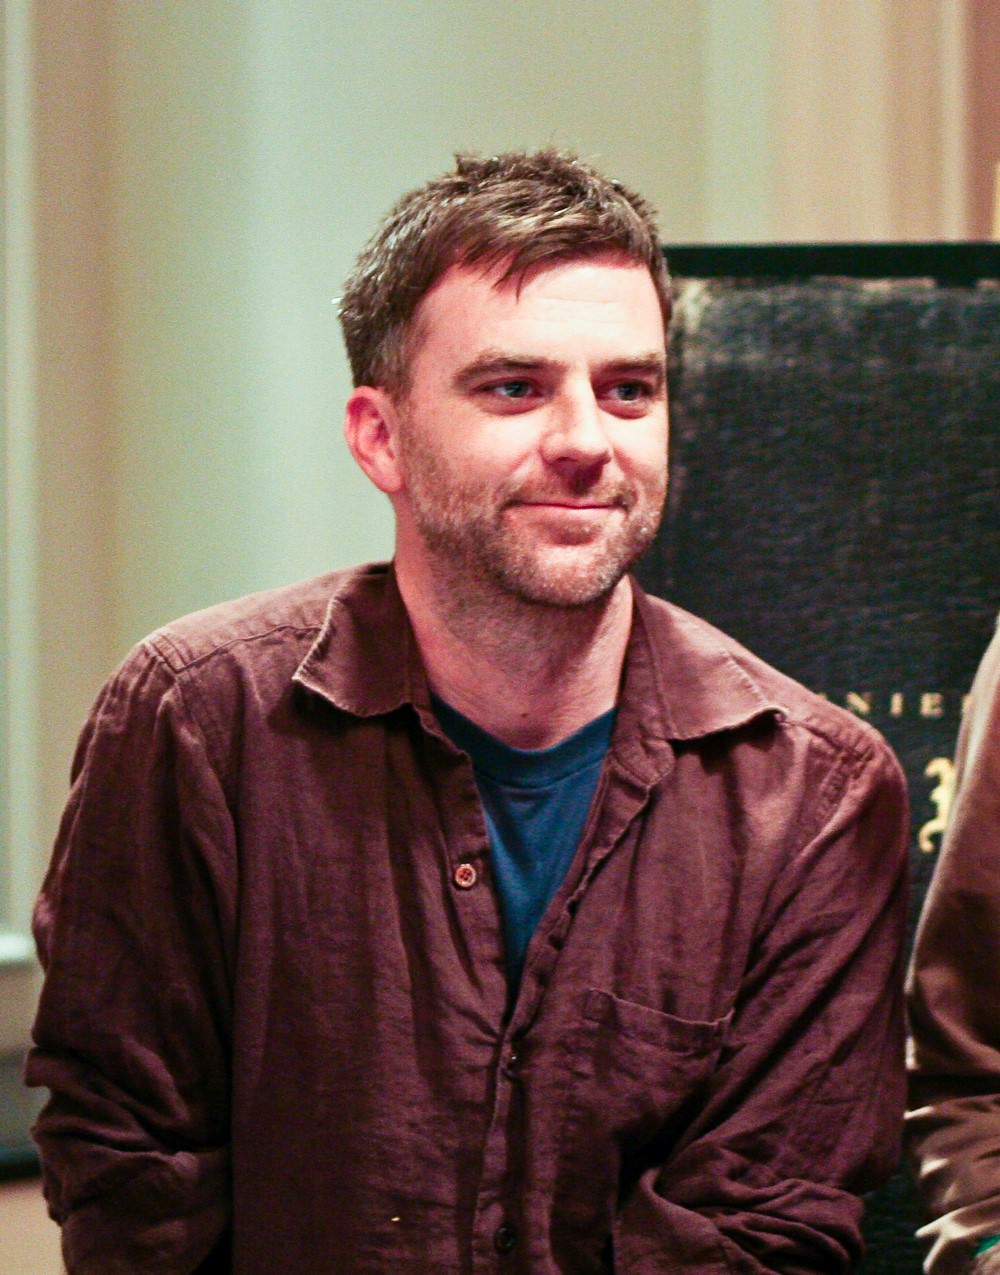 Paul Thomas Anderson and Dainel Day-Lewis